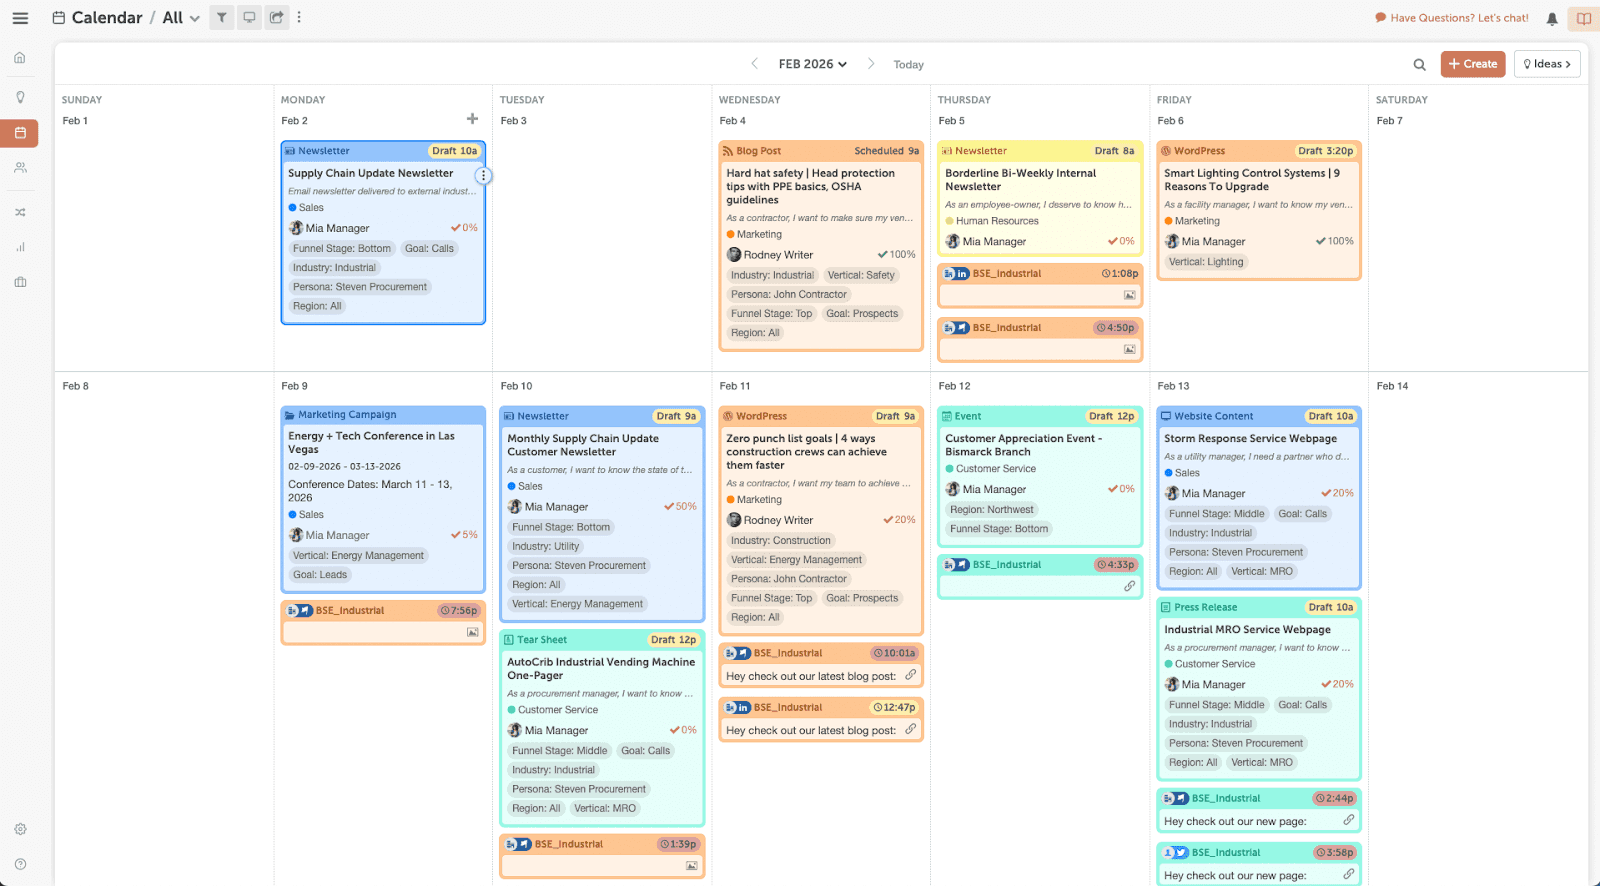 CoSchedule's marketing suite calendar displaying color-coded tasks to do for each day